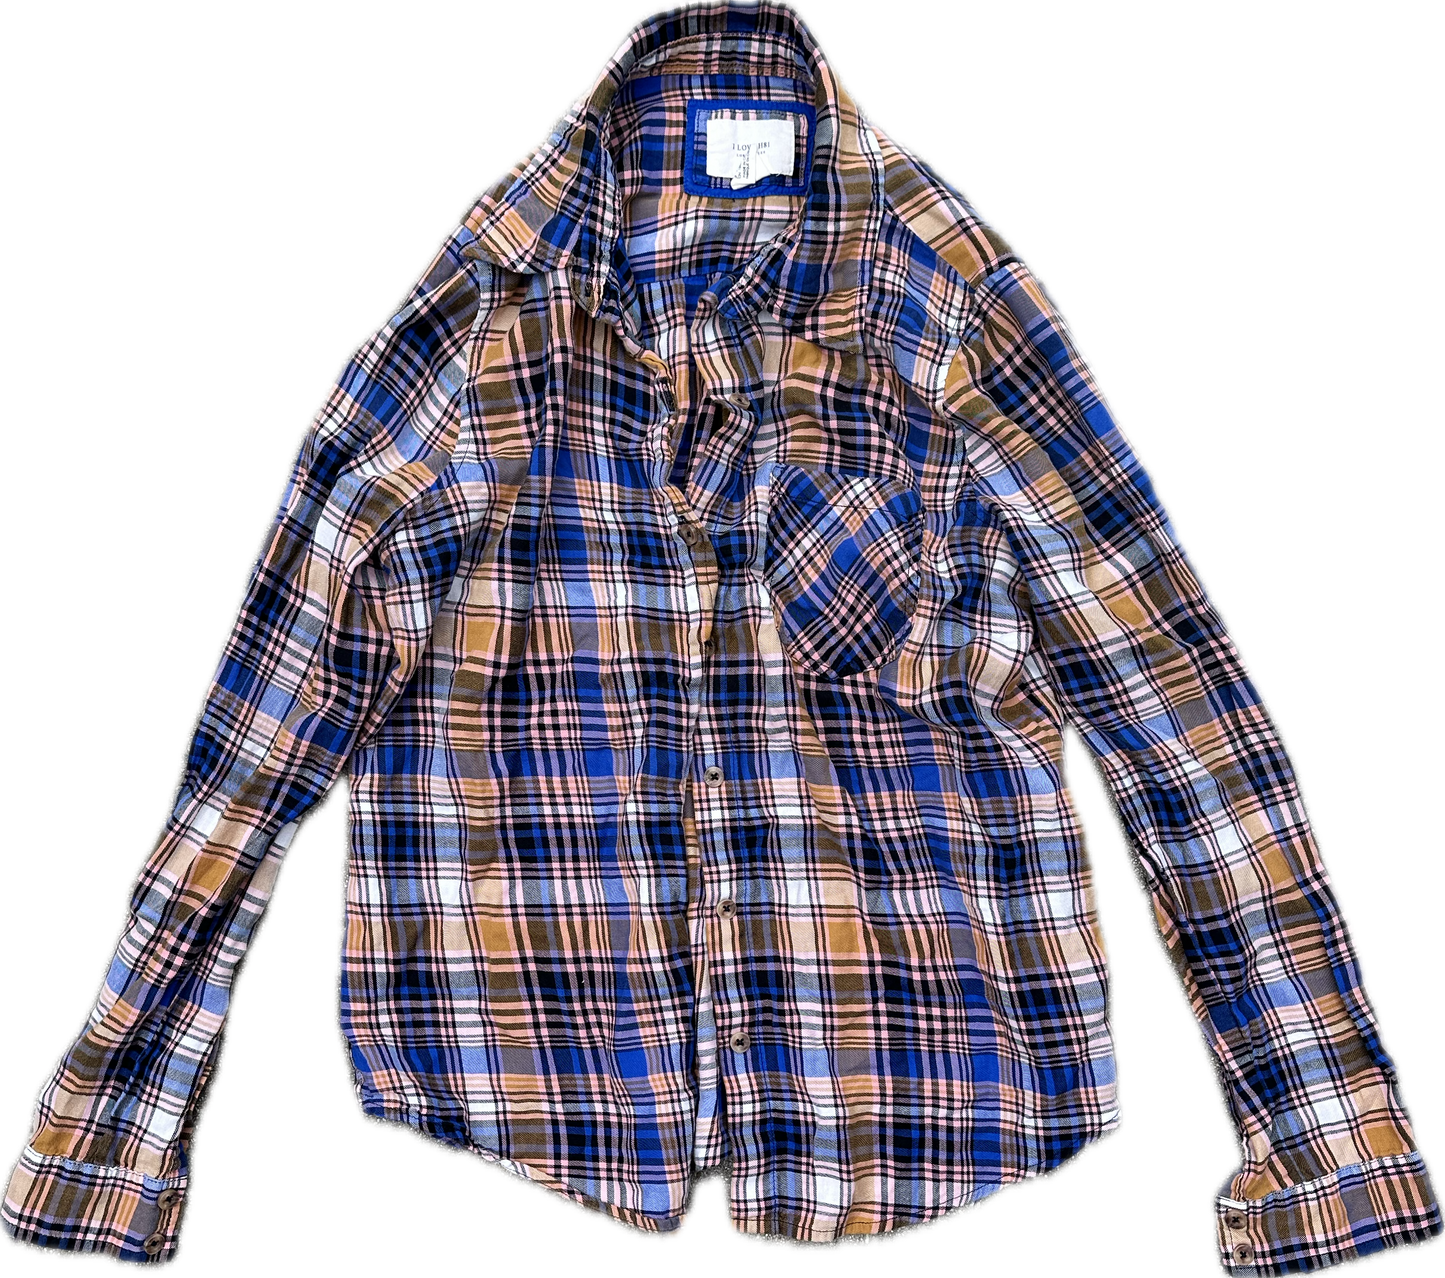 NEW GIRL: Jessica Day's Plaid Flannel Shirt Collections